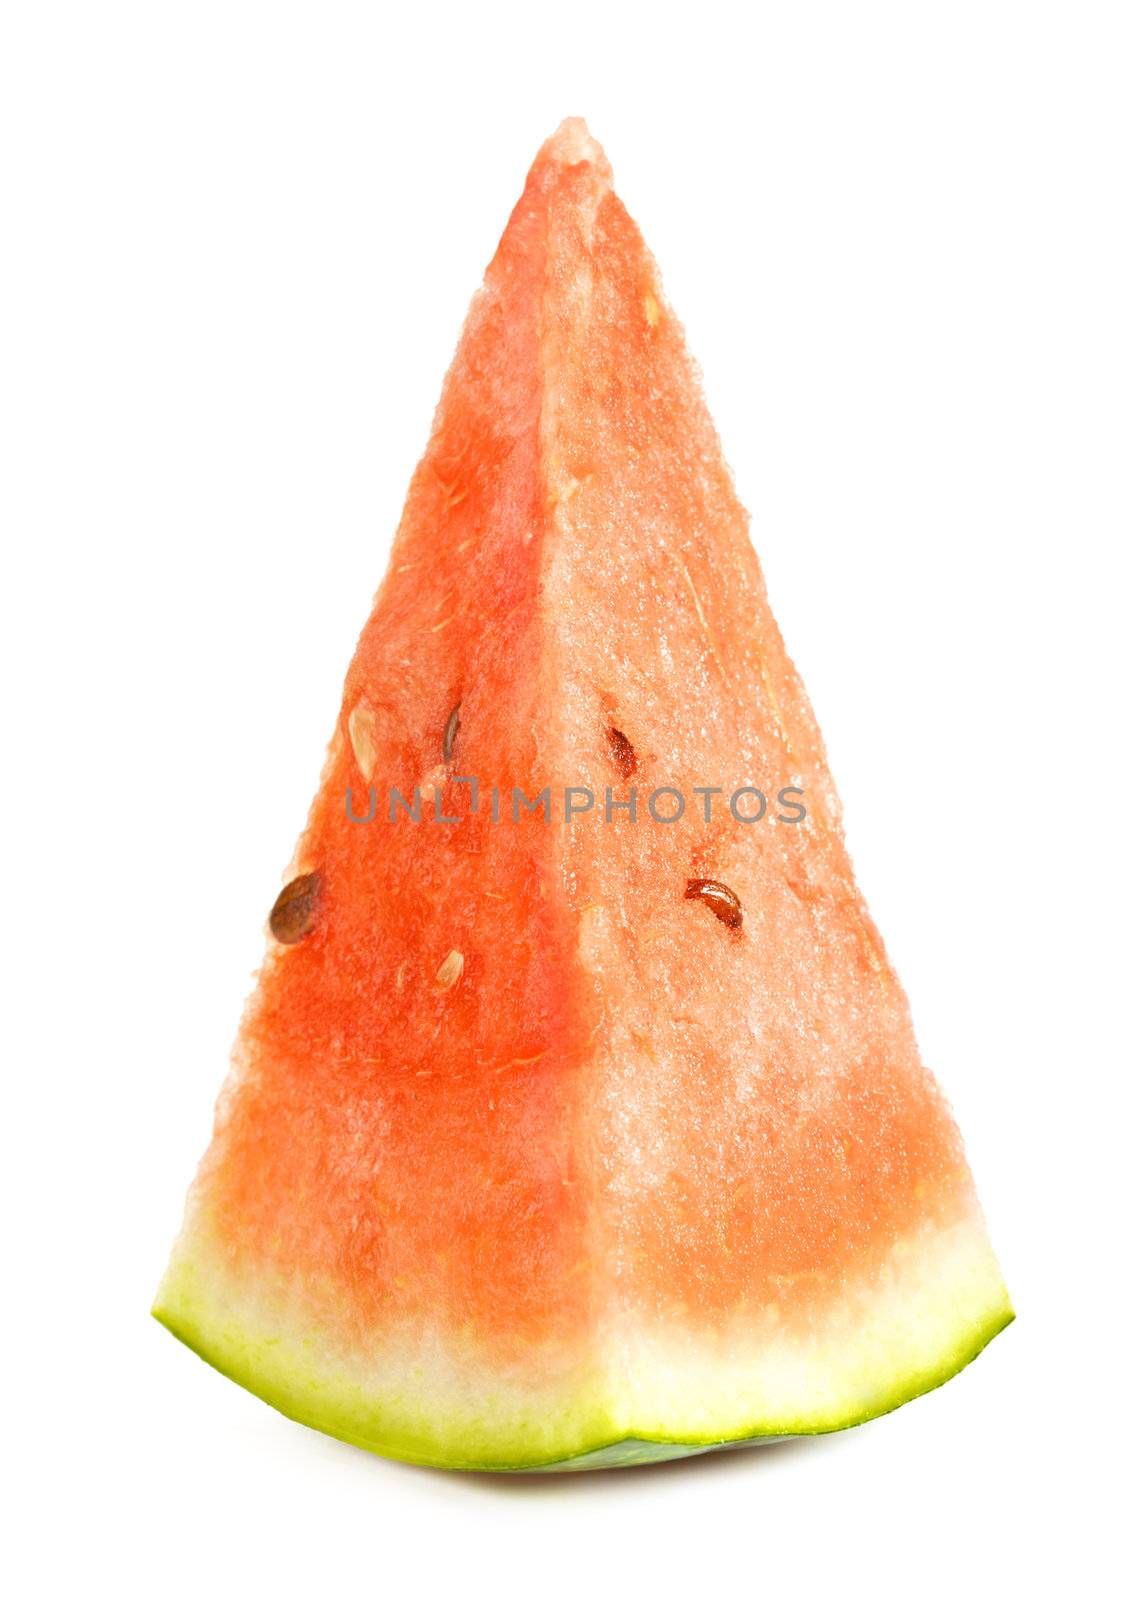 fresh slice of watermelon isolated on white